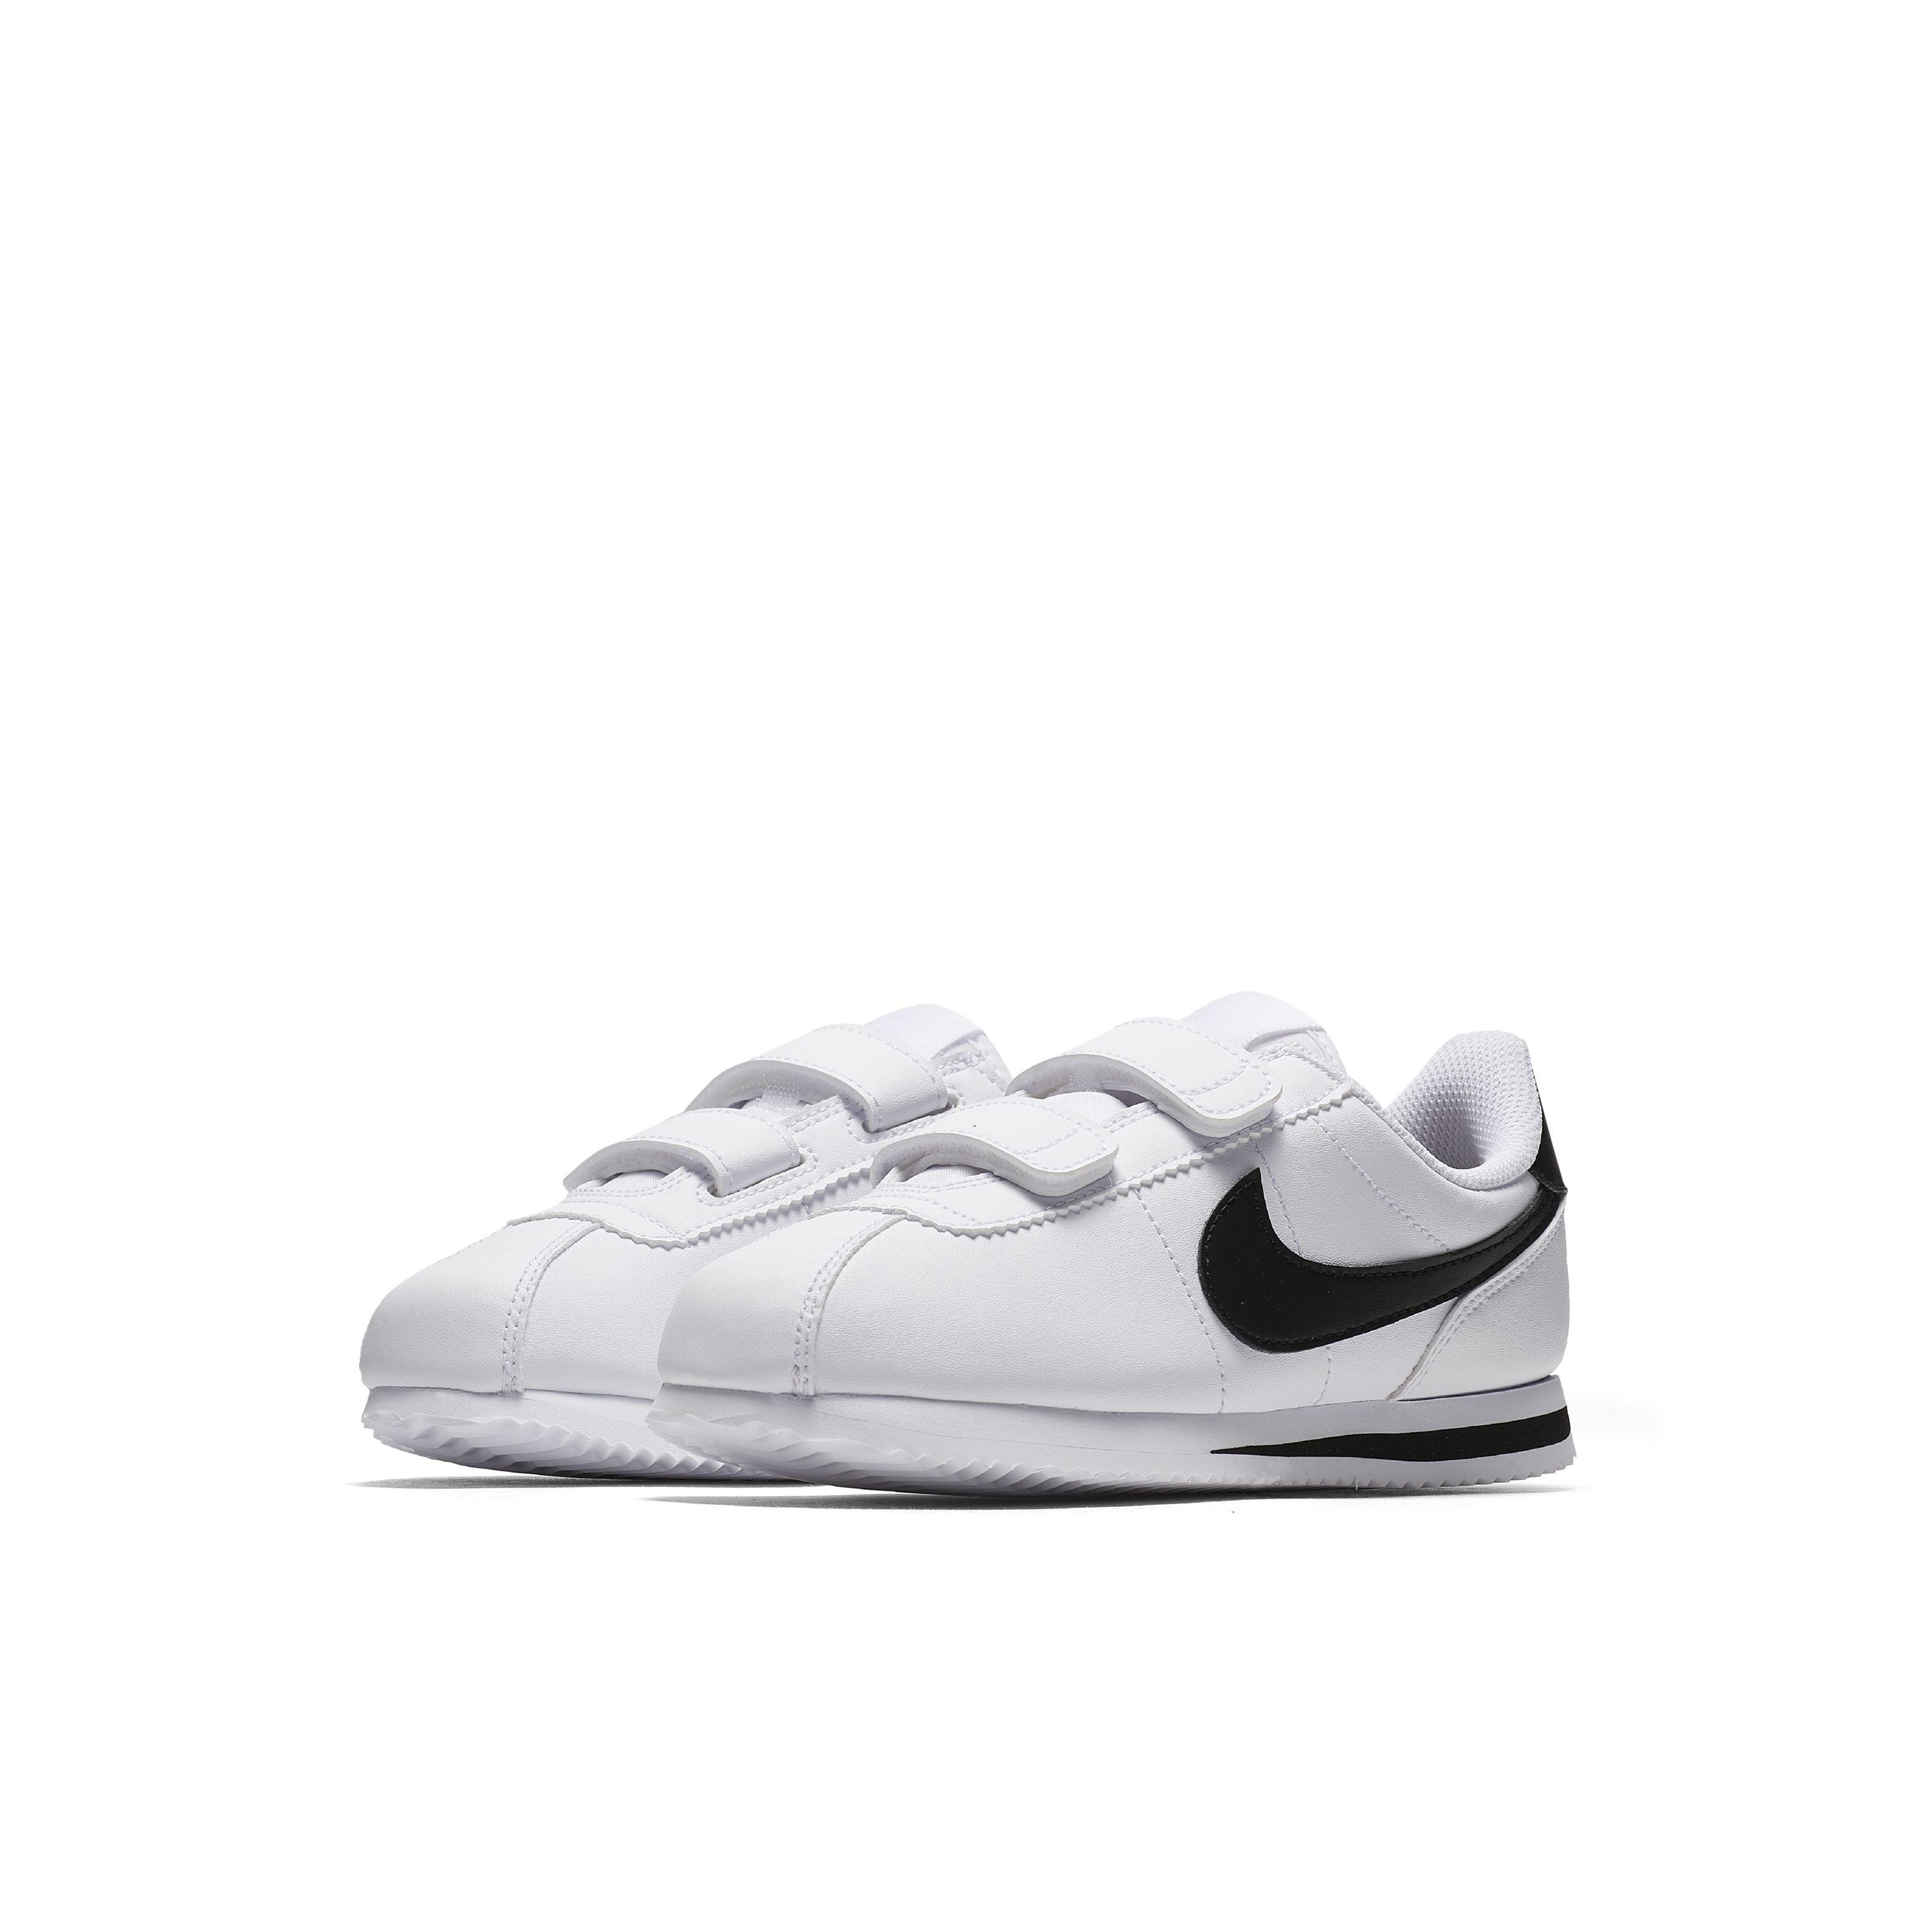 Nike Cortez Basic (GS) Girl's Size 2Y Running Shoes White